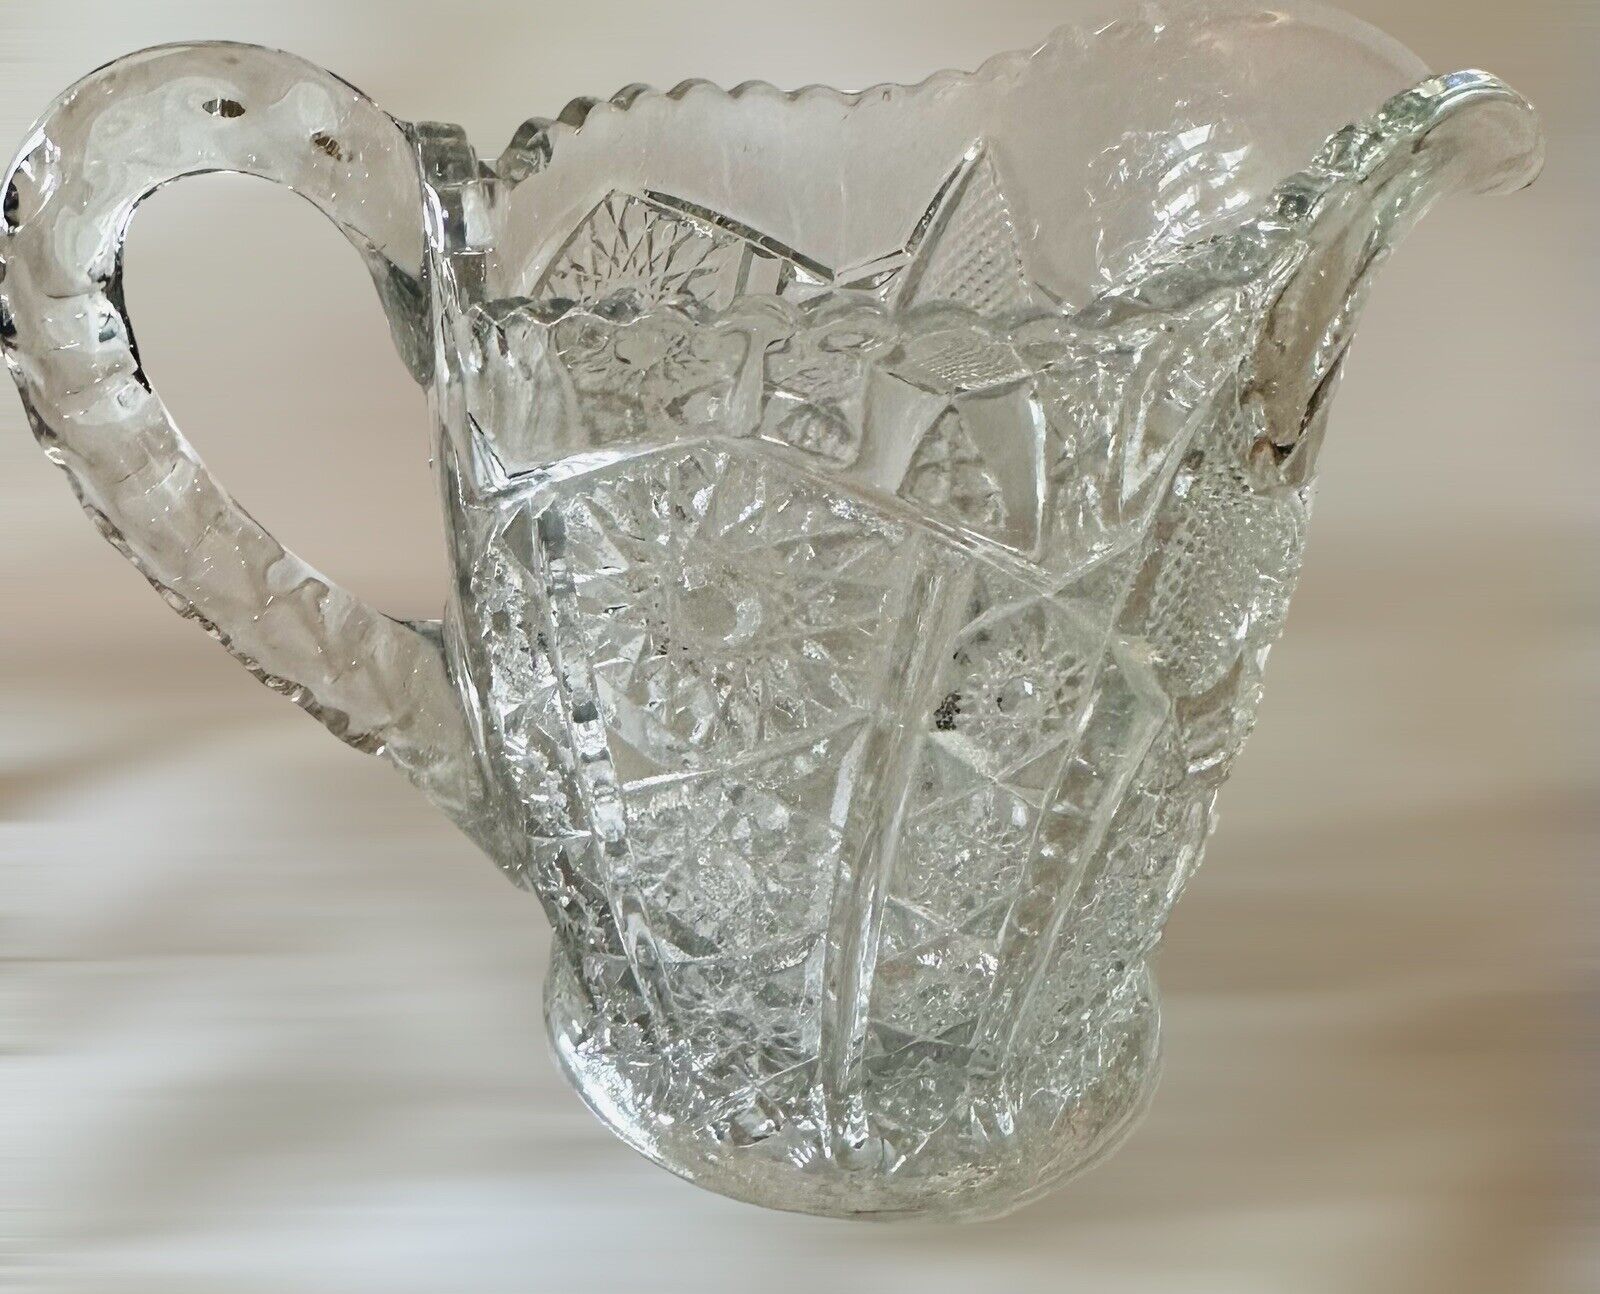 Antique EAPG Clear Glass Small Pitcher, Creamer Early 1900s MINT CONDITION